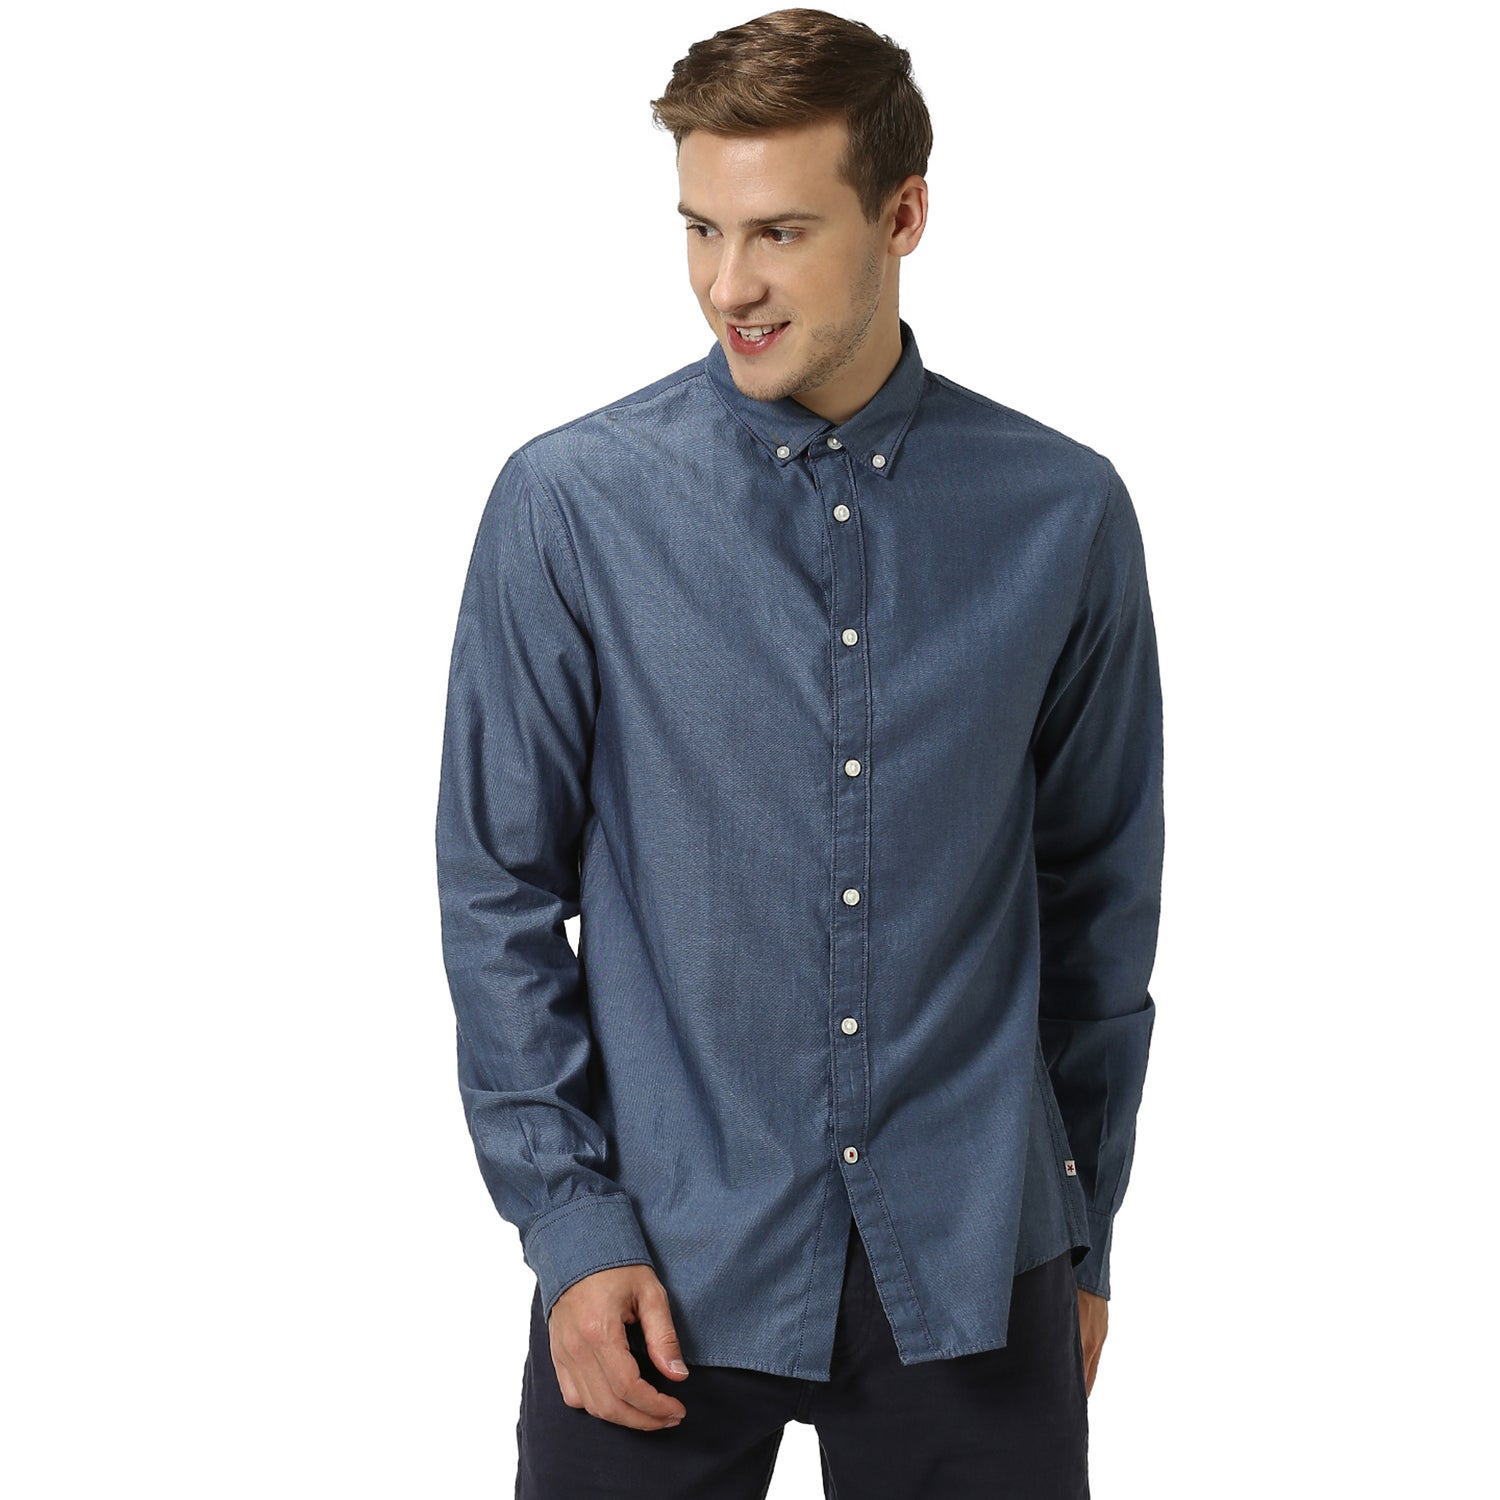 Navy Blue Slim Fit Solid Casual Shirt (NAPINPOINT1)